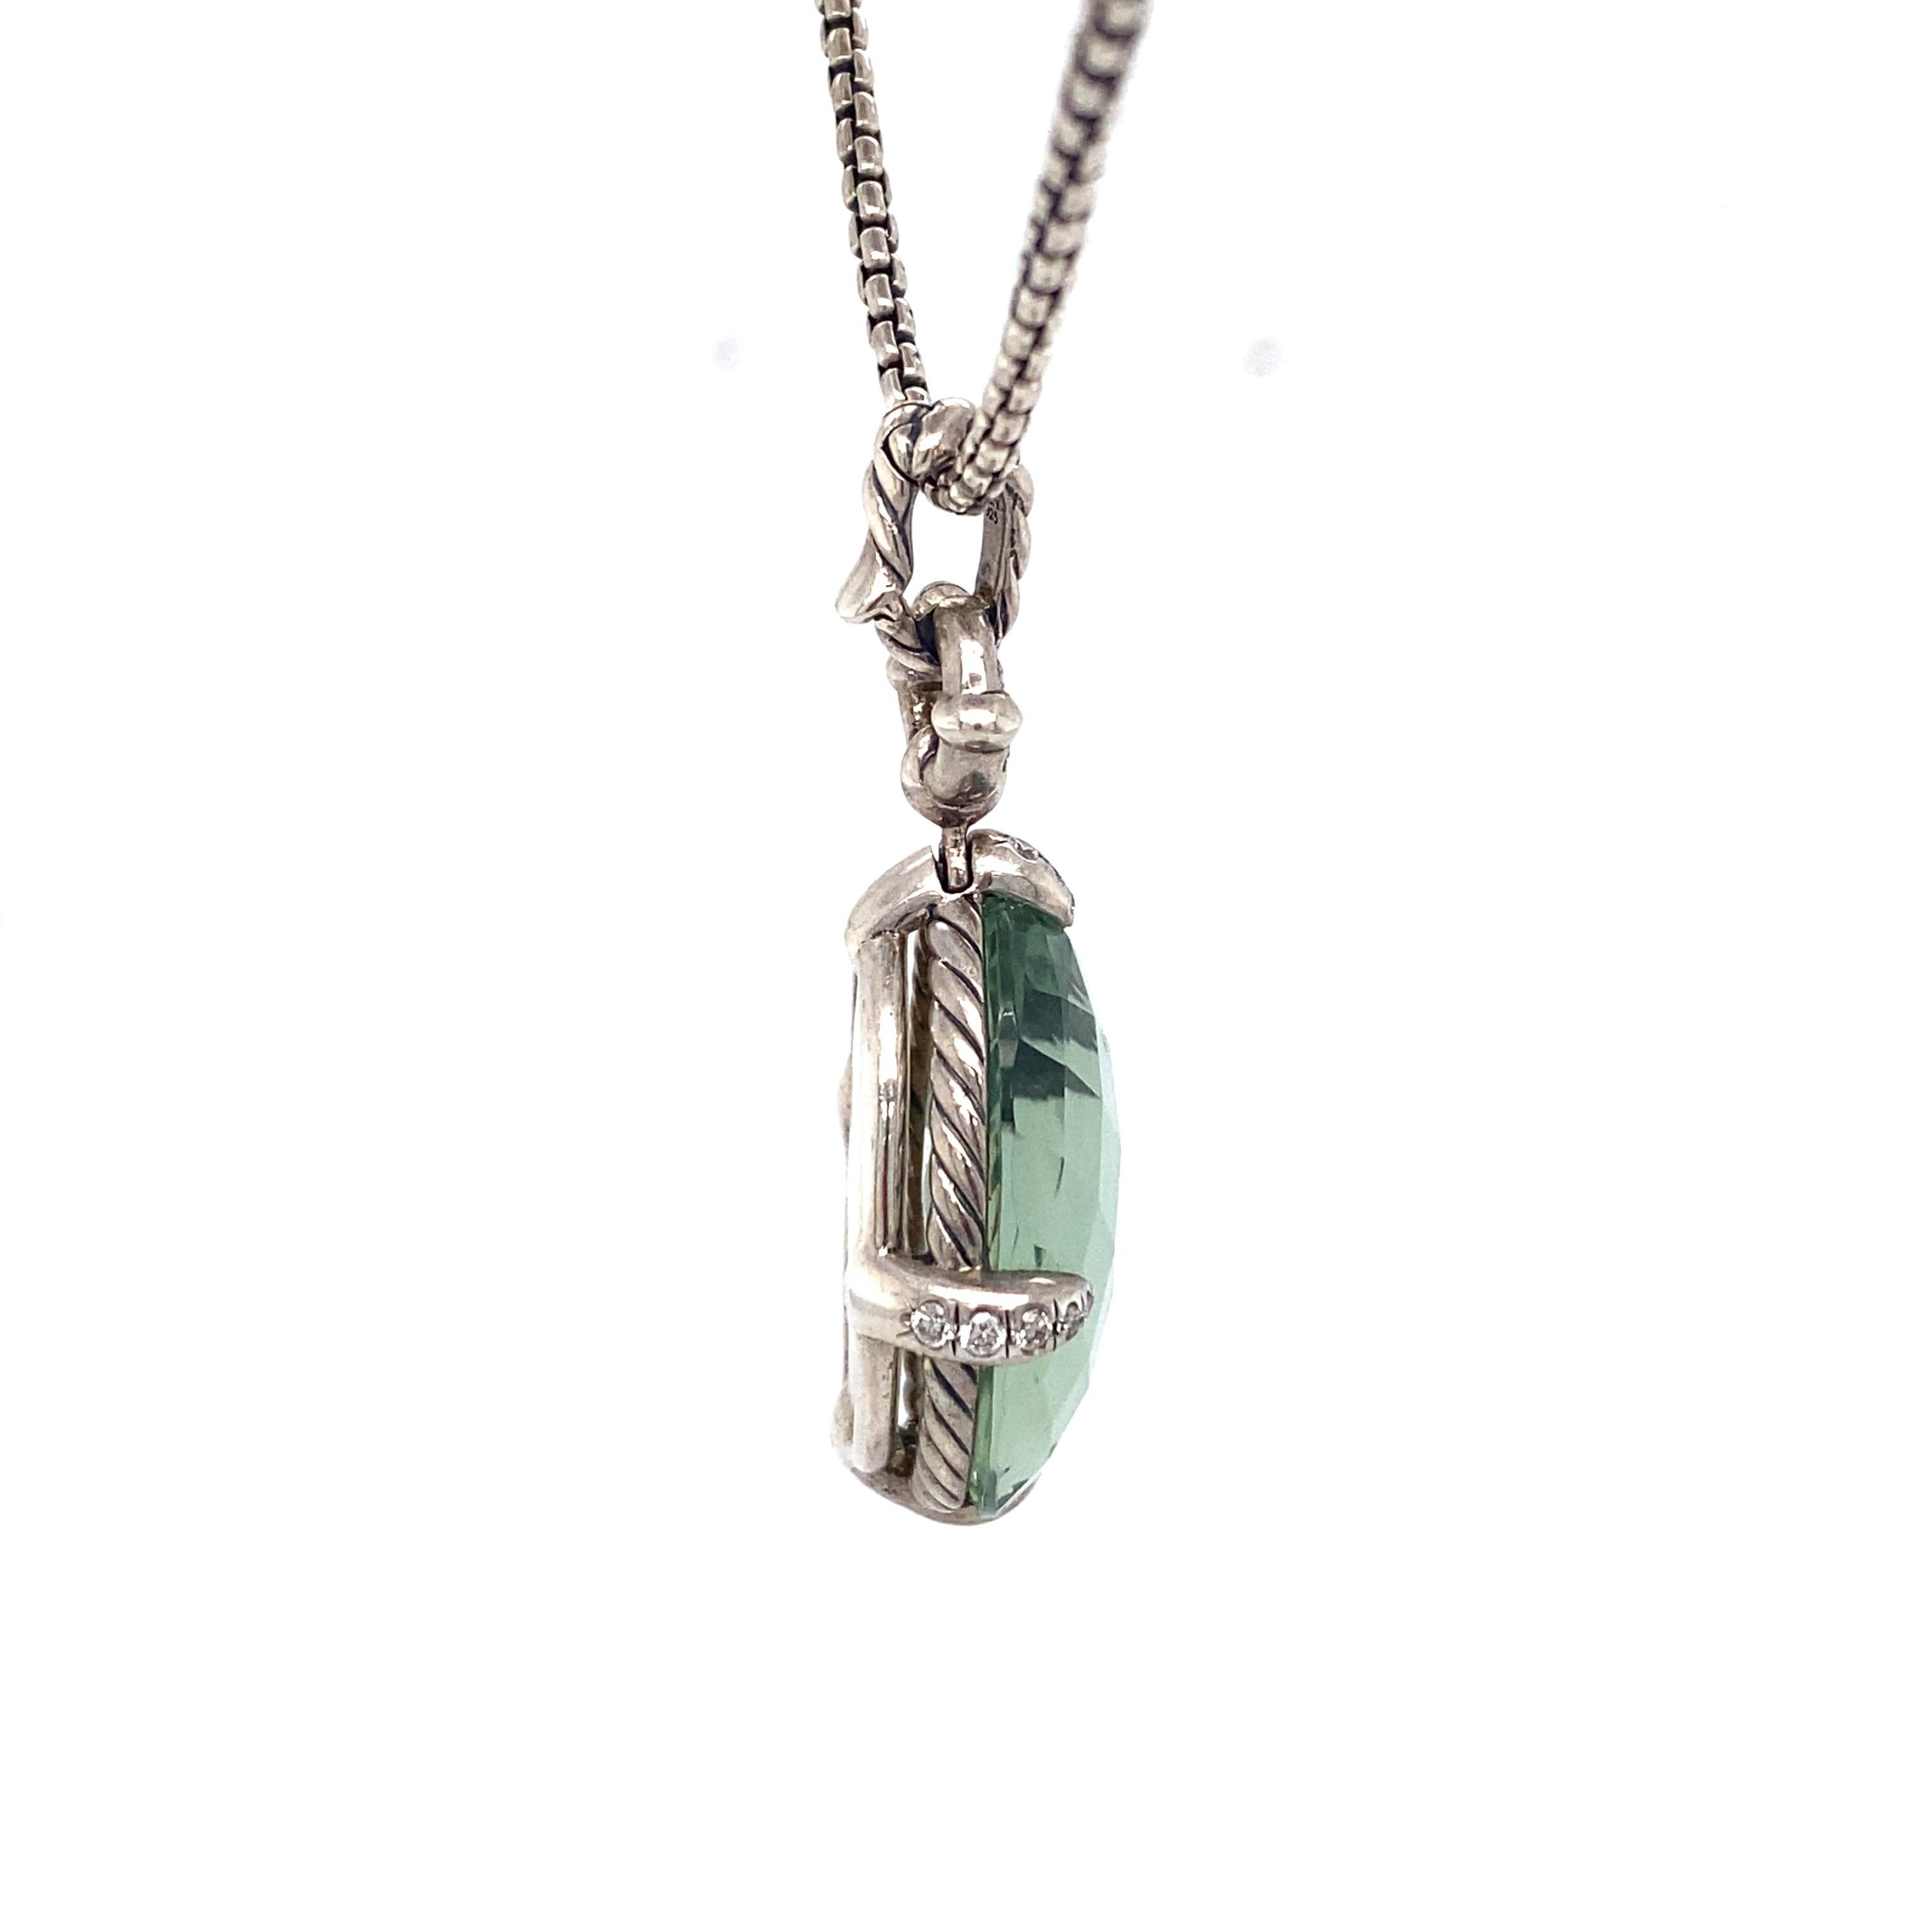 This pendant by David Yurman features an oval prasolite stone with accent diamonds on an adjustable chain that extends to 38 inches.

Circa: 2000s
Metal Type: Sterling silver
Weight: 25.2g
Dimensions: Chain extends to 38 inches